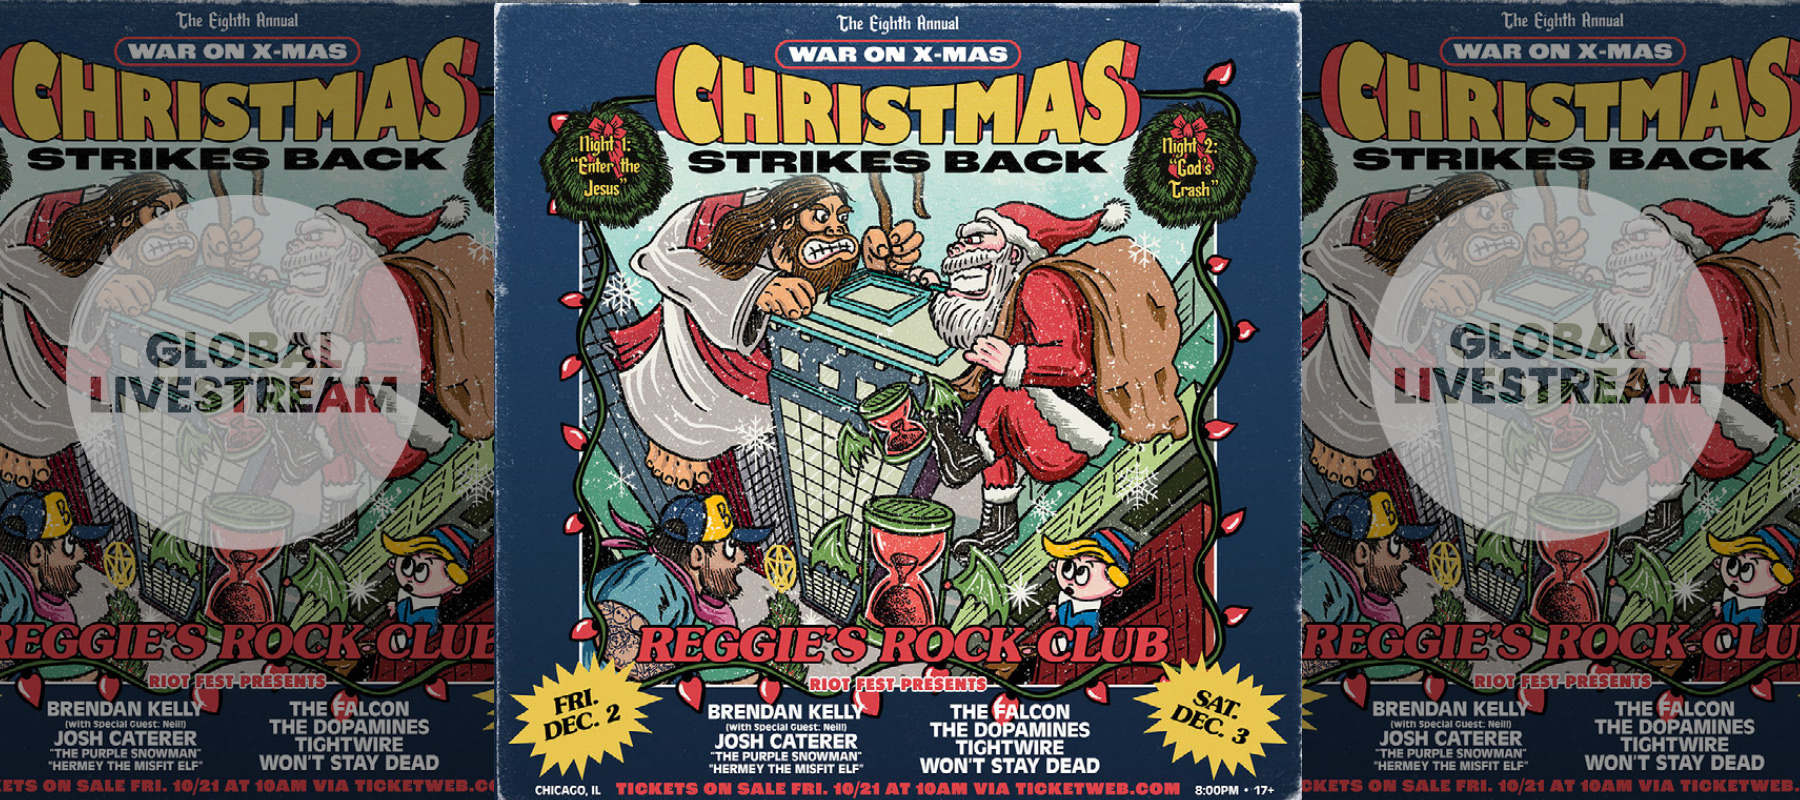 Riot Fest Presents The 8th Annual War on Xmas Livestream: December 2 & 3 at Reggies featuring Brendan Kelly (The Lawrence Arms), Josh Caterer (Smoking Popes), “Hermey the Misfit Elf”, The Falcon, The Dopamines, Tightwire, and Won't Stay Dead.  ** Dec 2 and Dec 3 are on replay and avail to watch now until Mon Dec 5 at midnight. Tickets are avail for purchase until Sun Dec 4 at midnight.**